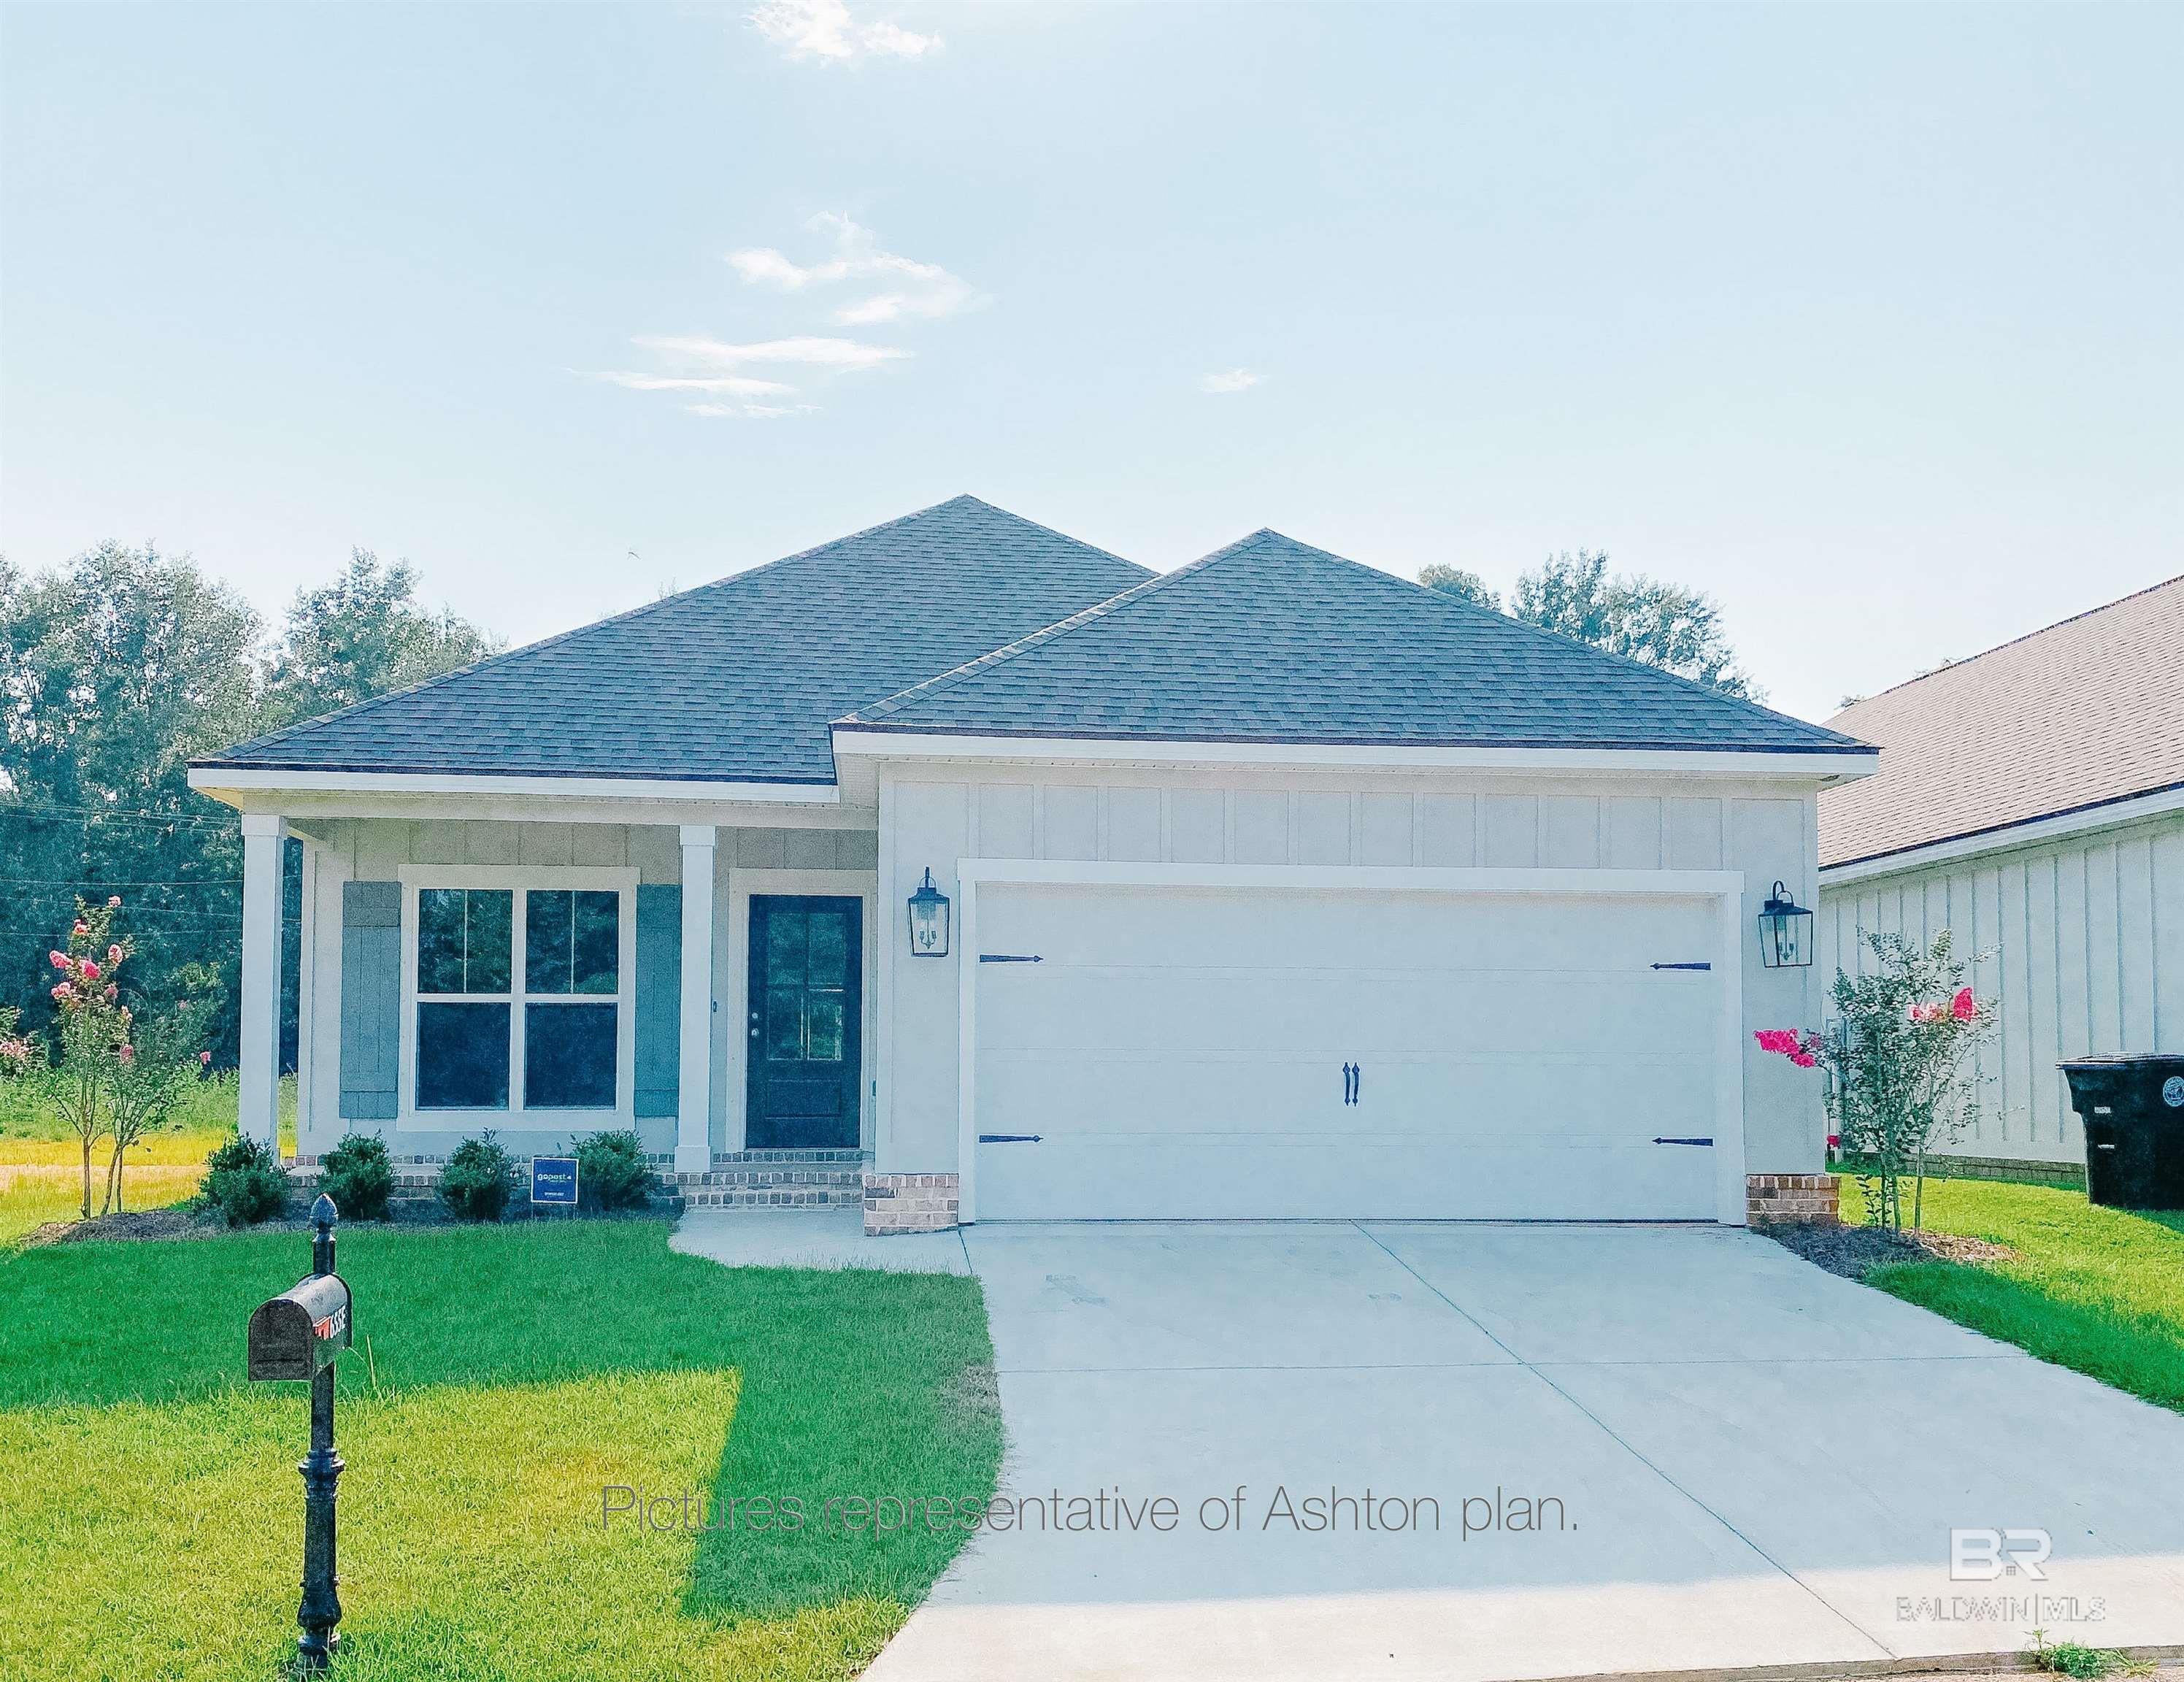 The Ashton plan is ready for you to call home close to downtown Fairhope! Just off the foyer that features 10-foot ceilings is a flex space that gets tons of natural light. From there, you’ll pass the garage entrance with mud bench and drop zone just off the large laundry room. The open concept creates a functional flow through the living room, dining area and kitchen, which features a huge island and pantry, tons to cabinet storage, high-end counter tops and additional seating at the breakfast bar. Spread out in the spacious living room that boasts 11-foot ceilings and overlooks the backyard and porch. Relax in the master suite and its luxurious bathroom with oversized bathtub, separate shower, separate water closet, double vanities and walk-in closet. The other two bedrooms are located near the kitchen and near the other full bath. Don’t miss this amazing home built by Limitless Homes and conveniently located to all the wonderful things Fairhope offers! Other conveniences include a 2-10 warranty, termite bond, architectural shingle roof, Gold Fortification for added protection, and more. Projected completion date is December 2021. Some pictures included are representative of similar style home.